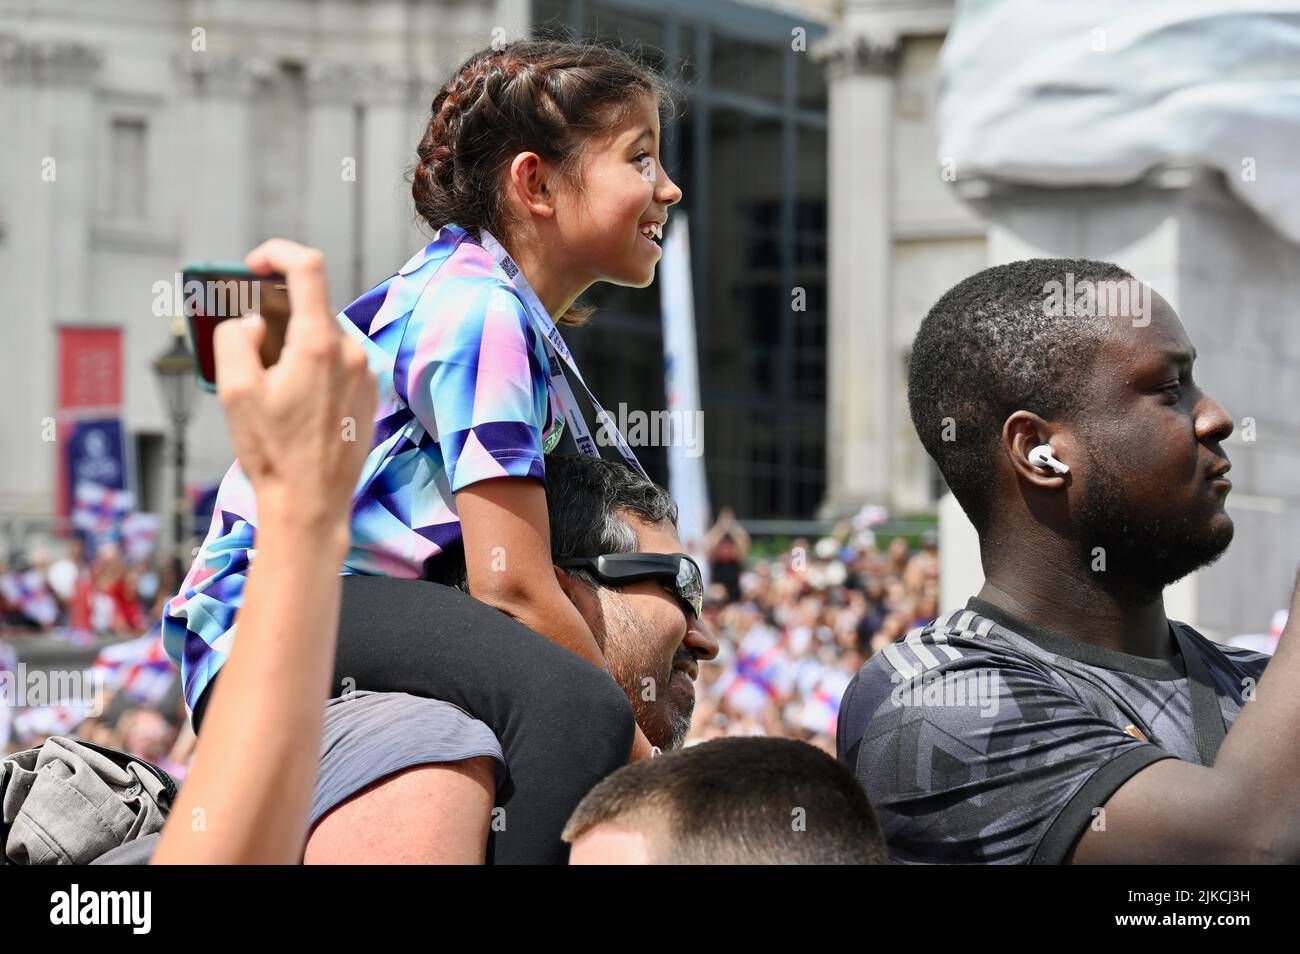 London, UK. England fans celebrated the Women's Euro 2022 win with the Lionesses in Trafalgar Square. Credit: michael melia/Alamy Live News Stock Photo